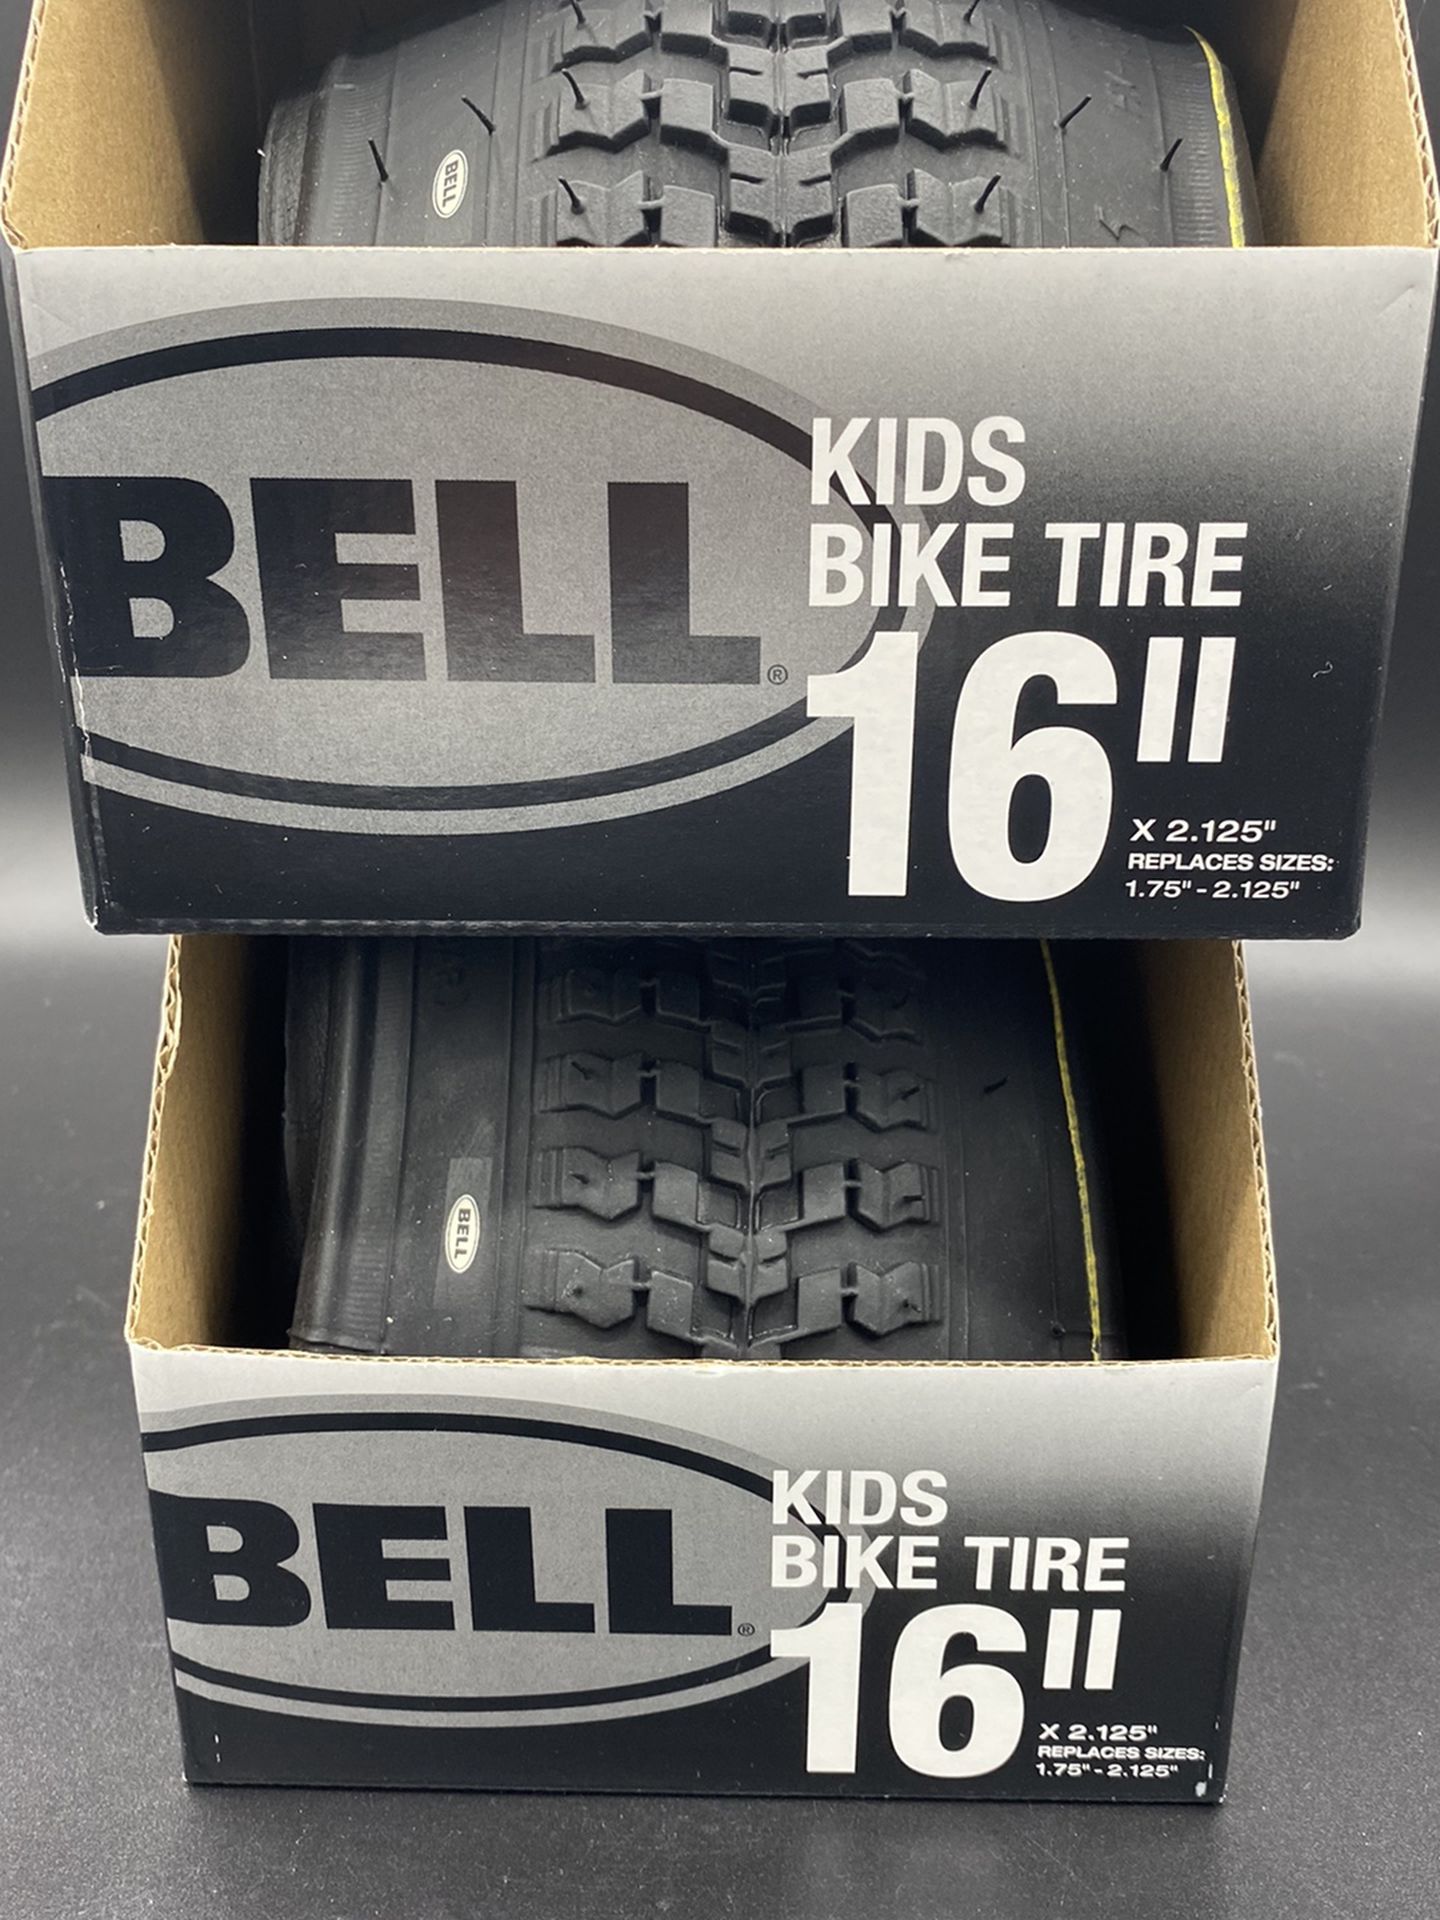 Two NEW Bell Kids Bike Tire (2X) 16” X 2.125” Replaces Sizes:1.75”-2.125” Black